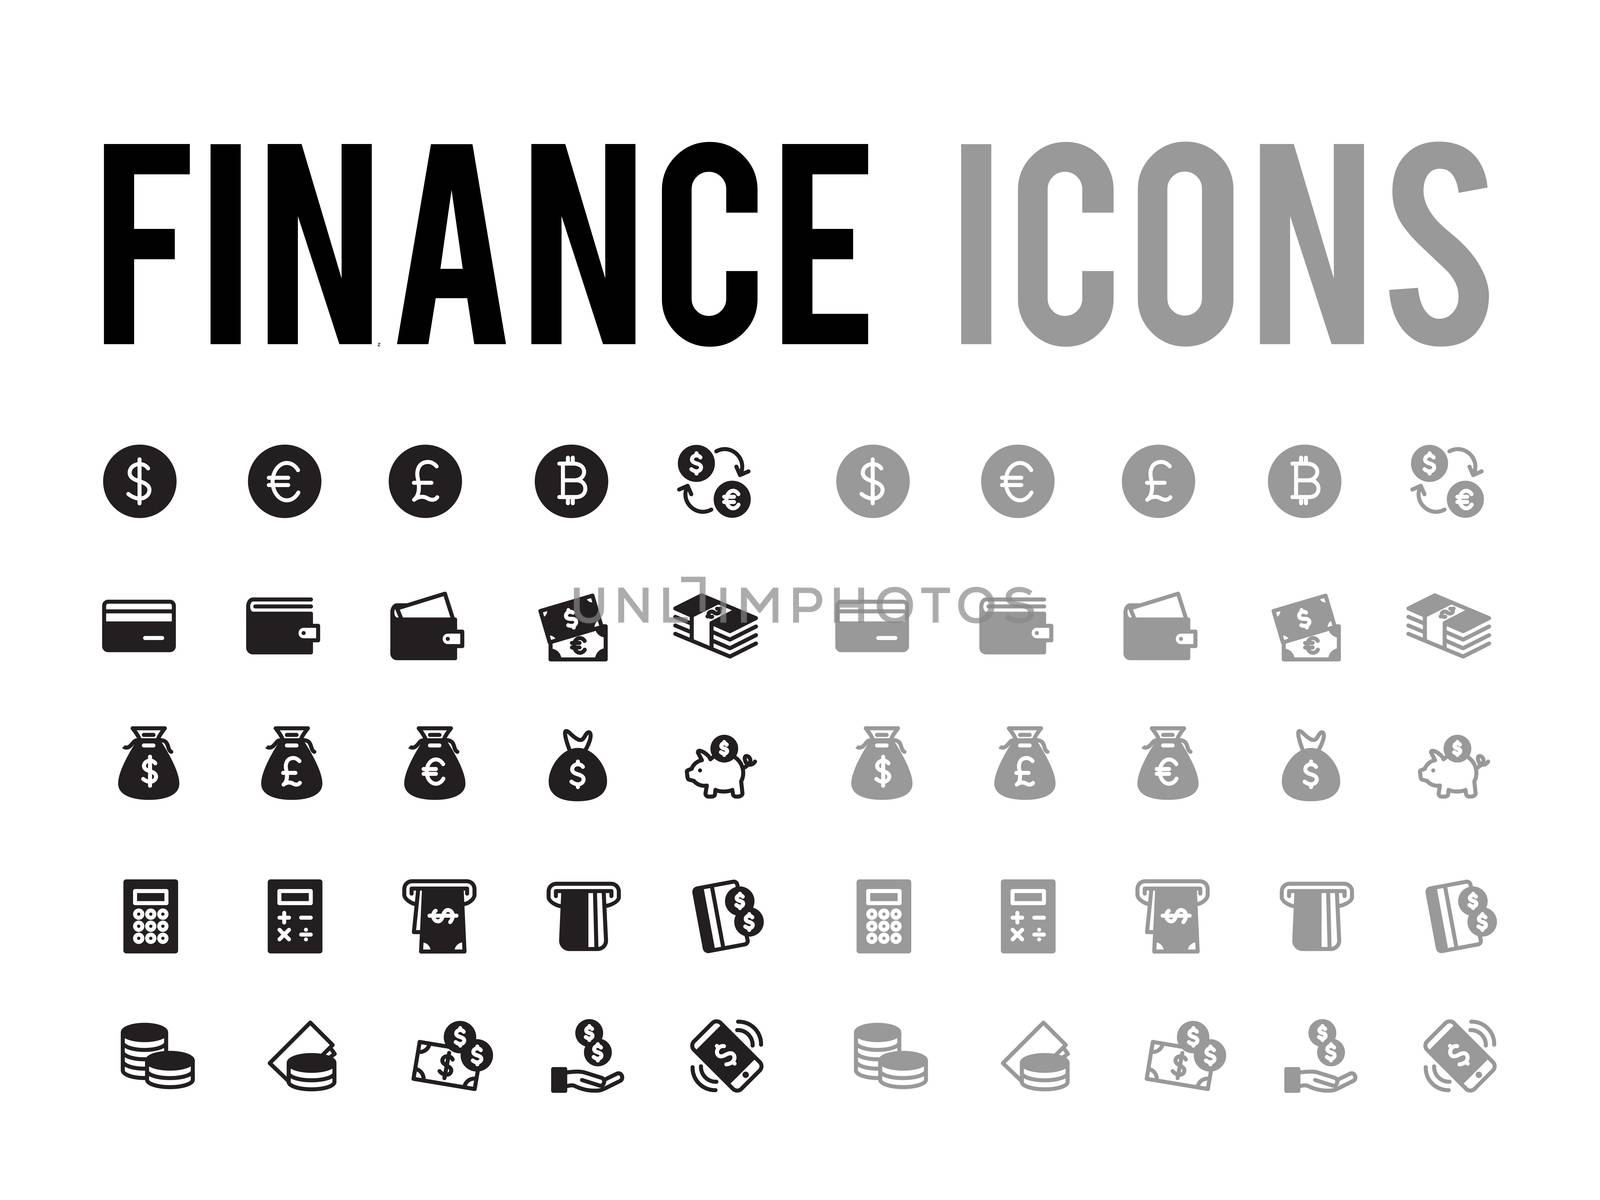 Finance, accounting payment method vector icon set by cougarsan